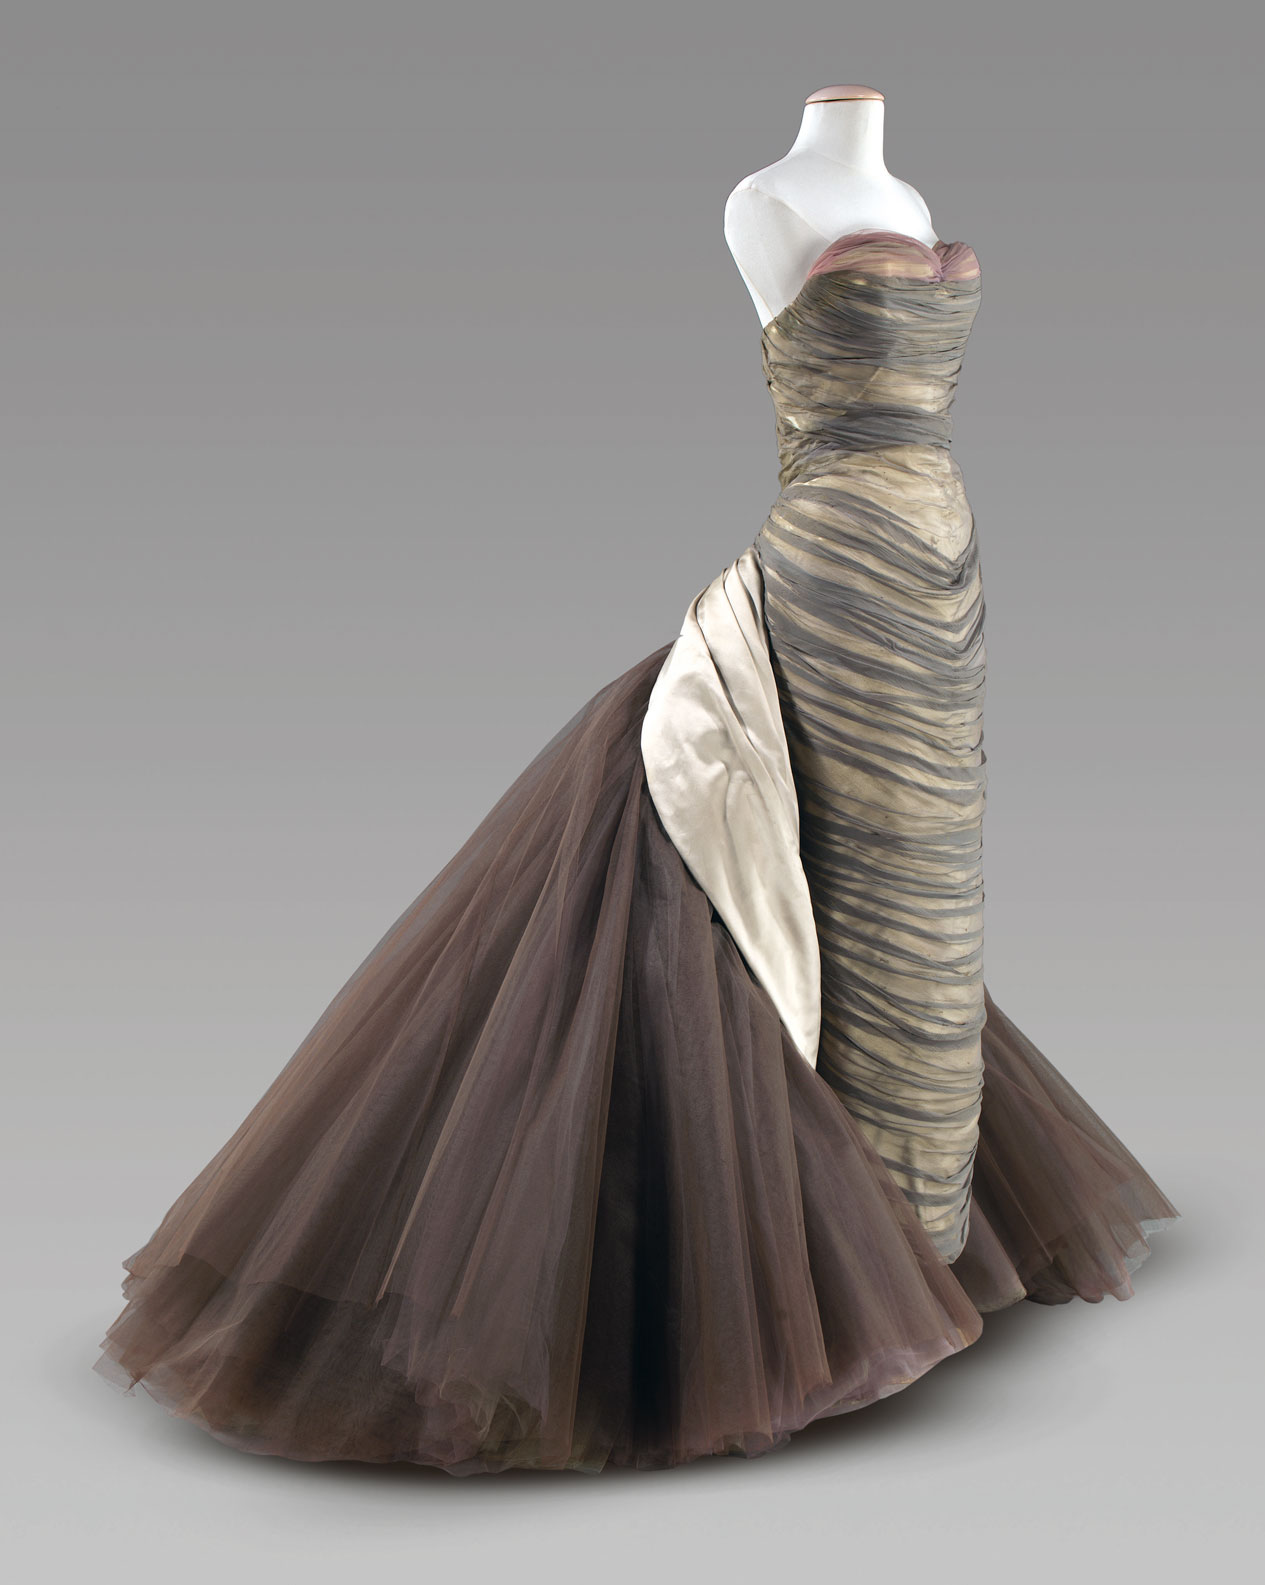 You love the ‘Butterfly’ (p.167, fig.7) by Charles James, a designer you’re less familiar with than Dior or Chanel, and you follow the essay cross-reference in the expectation of learning more about him. From Art =